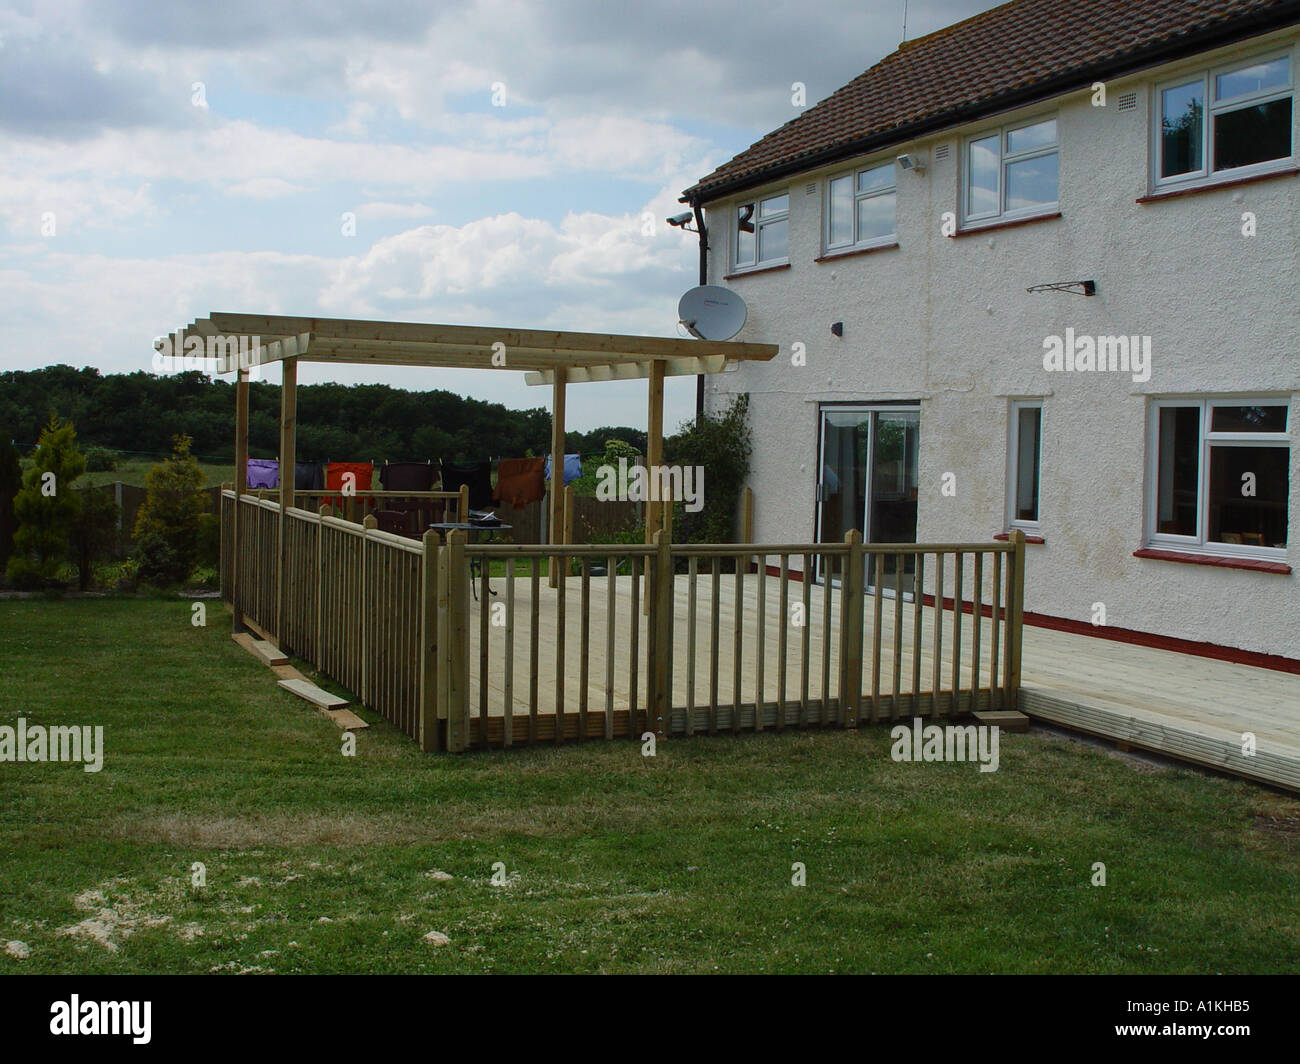 Timber garden decking with balustrades and pergola Stock Photo